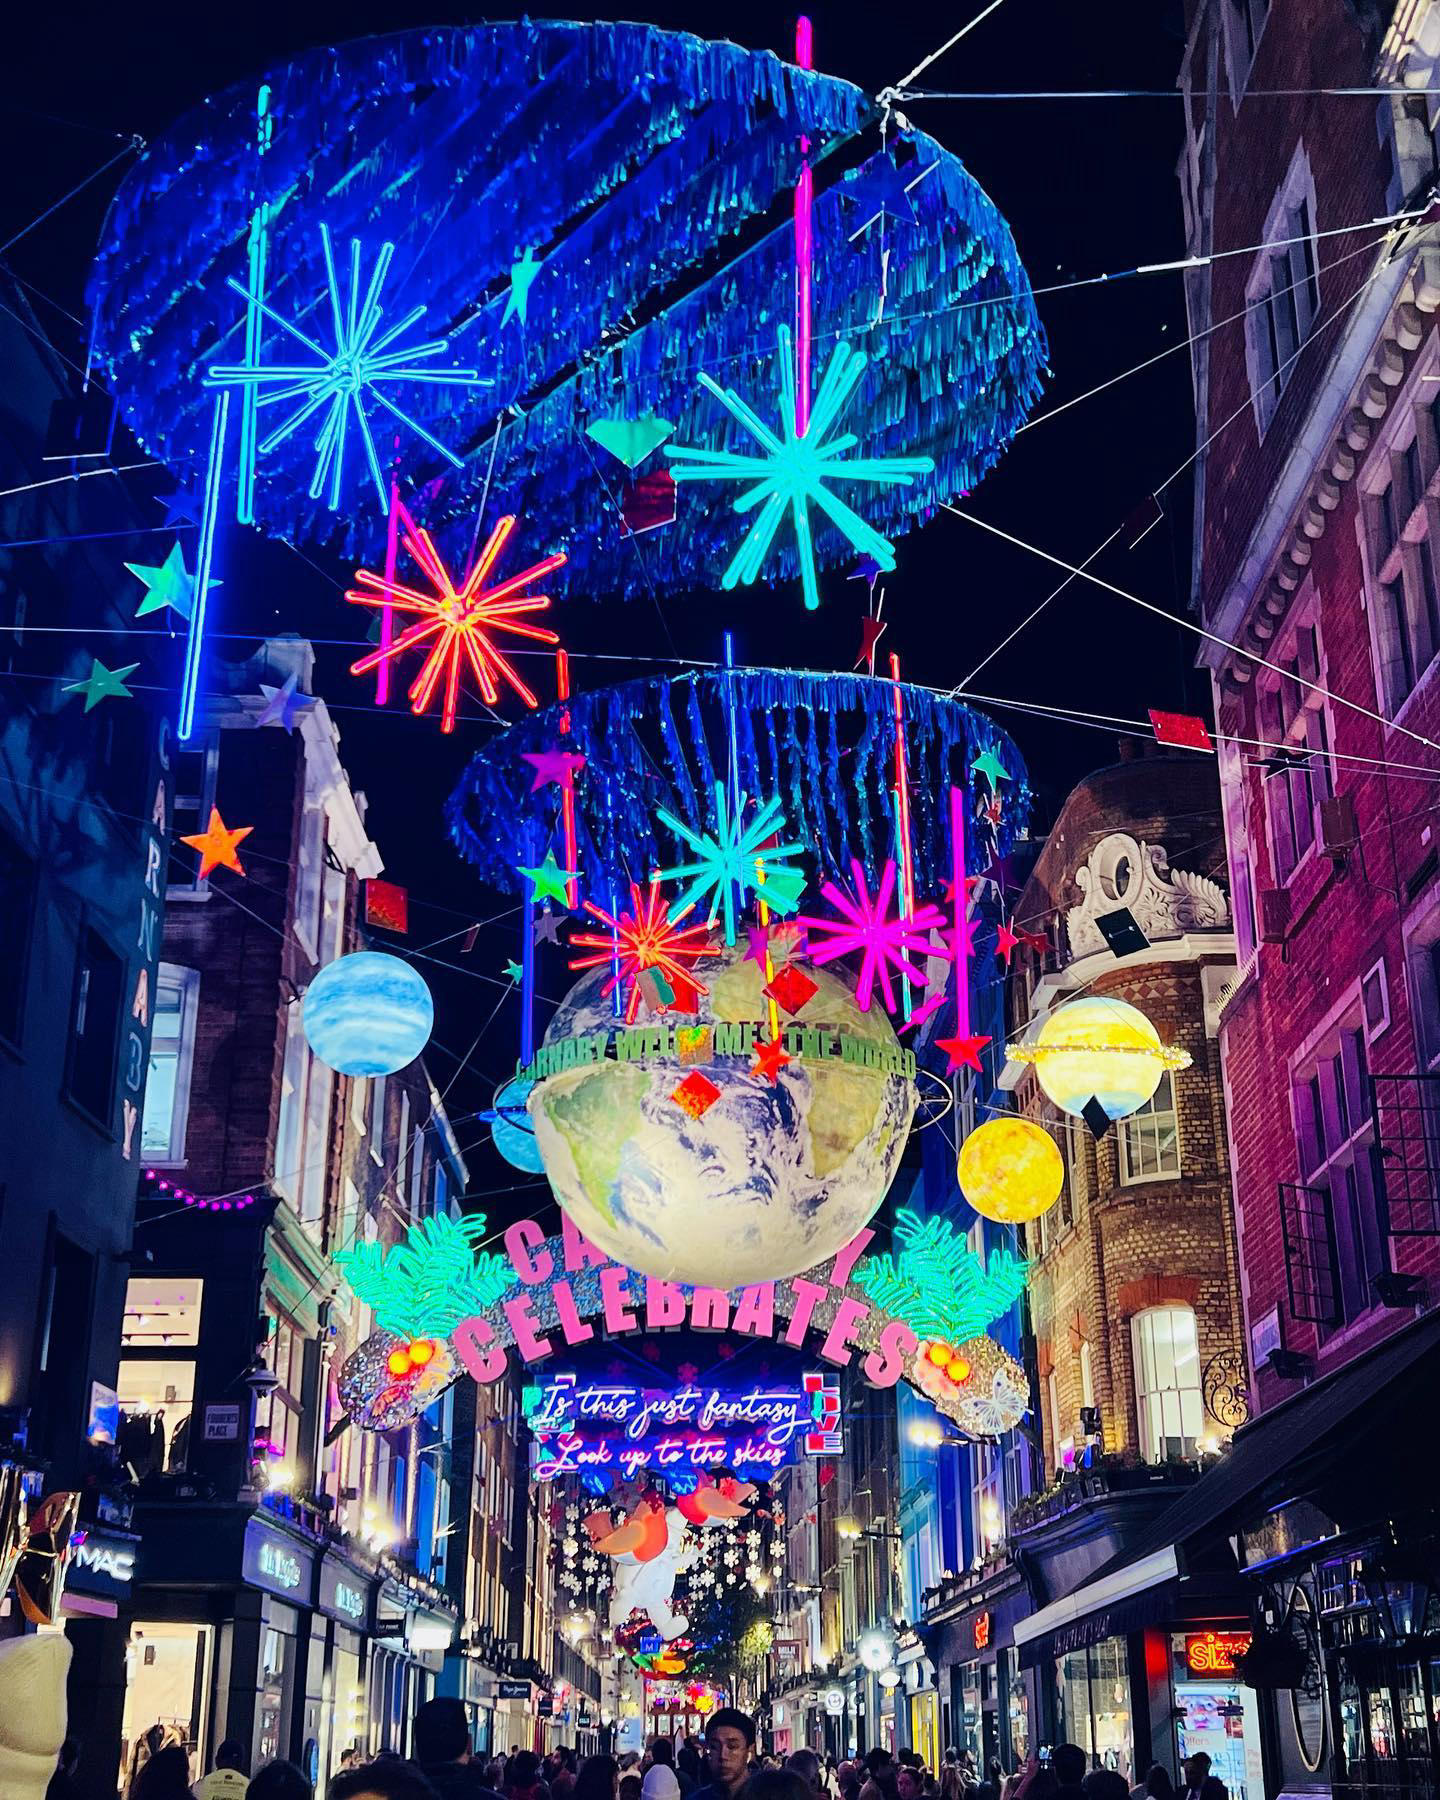 image  1 Every year, Carnaby Street continues to be my favourite Christmas lights display